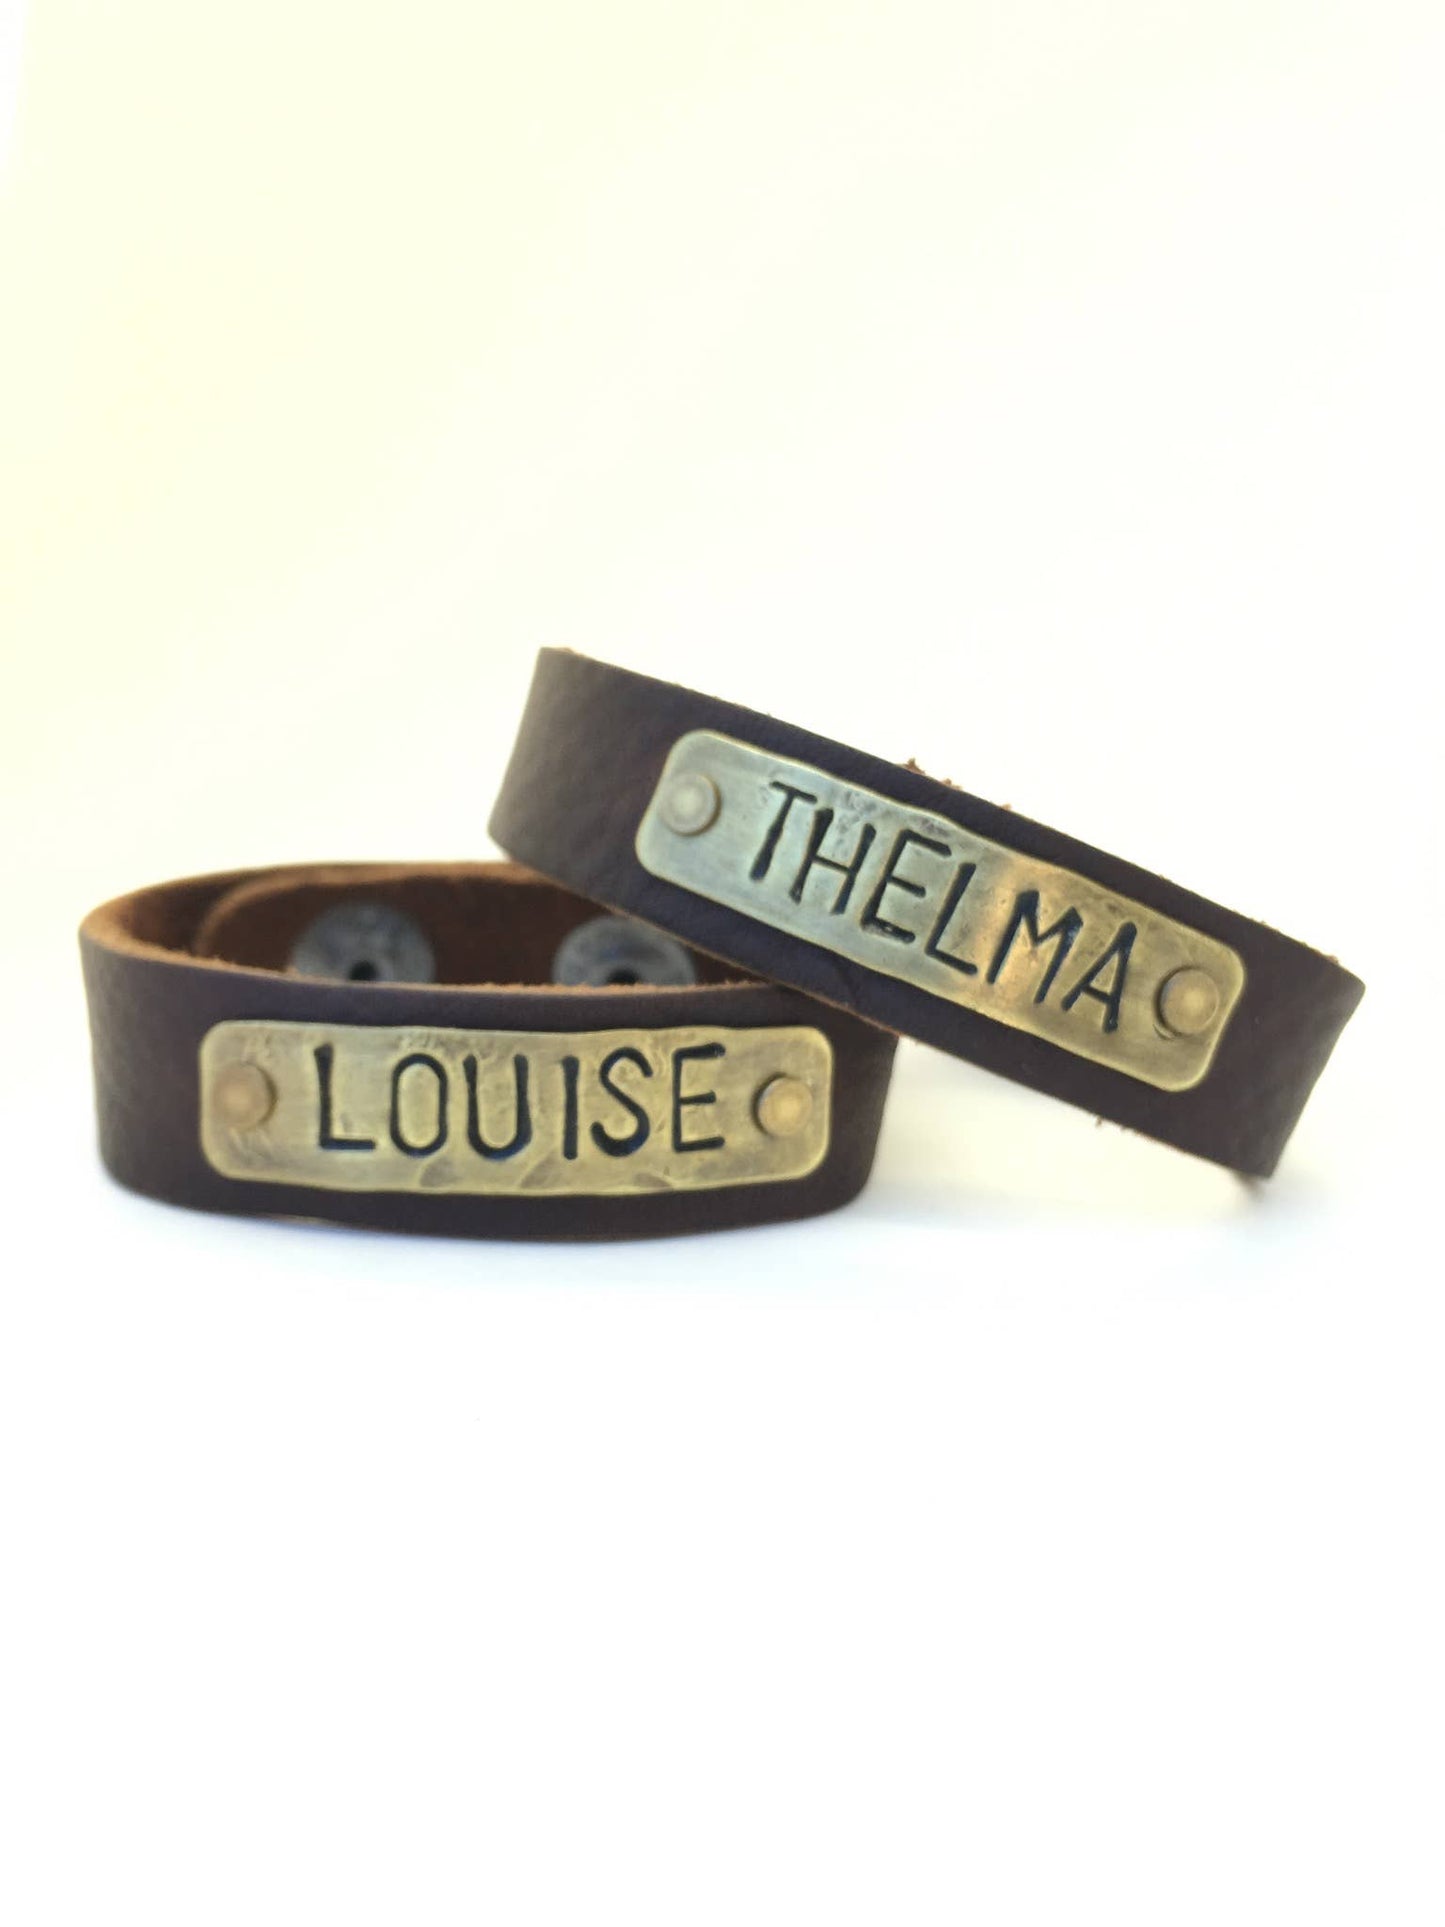 Thelma and Louise Leather Bracelet Set